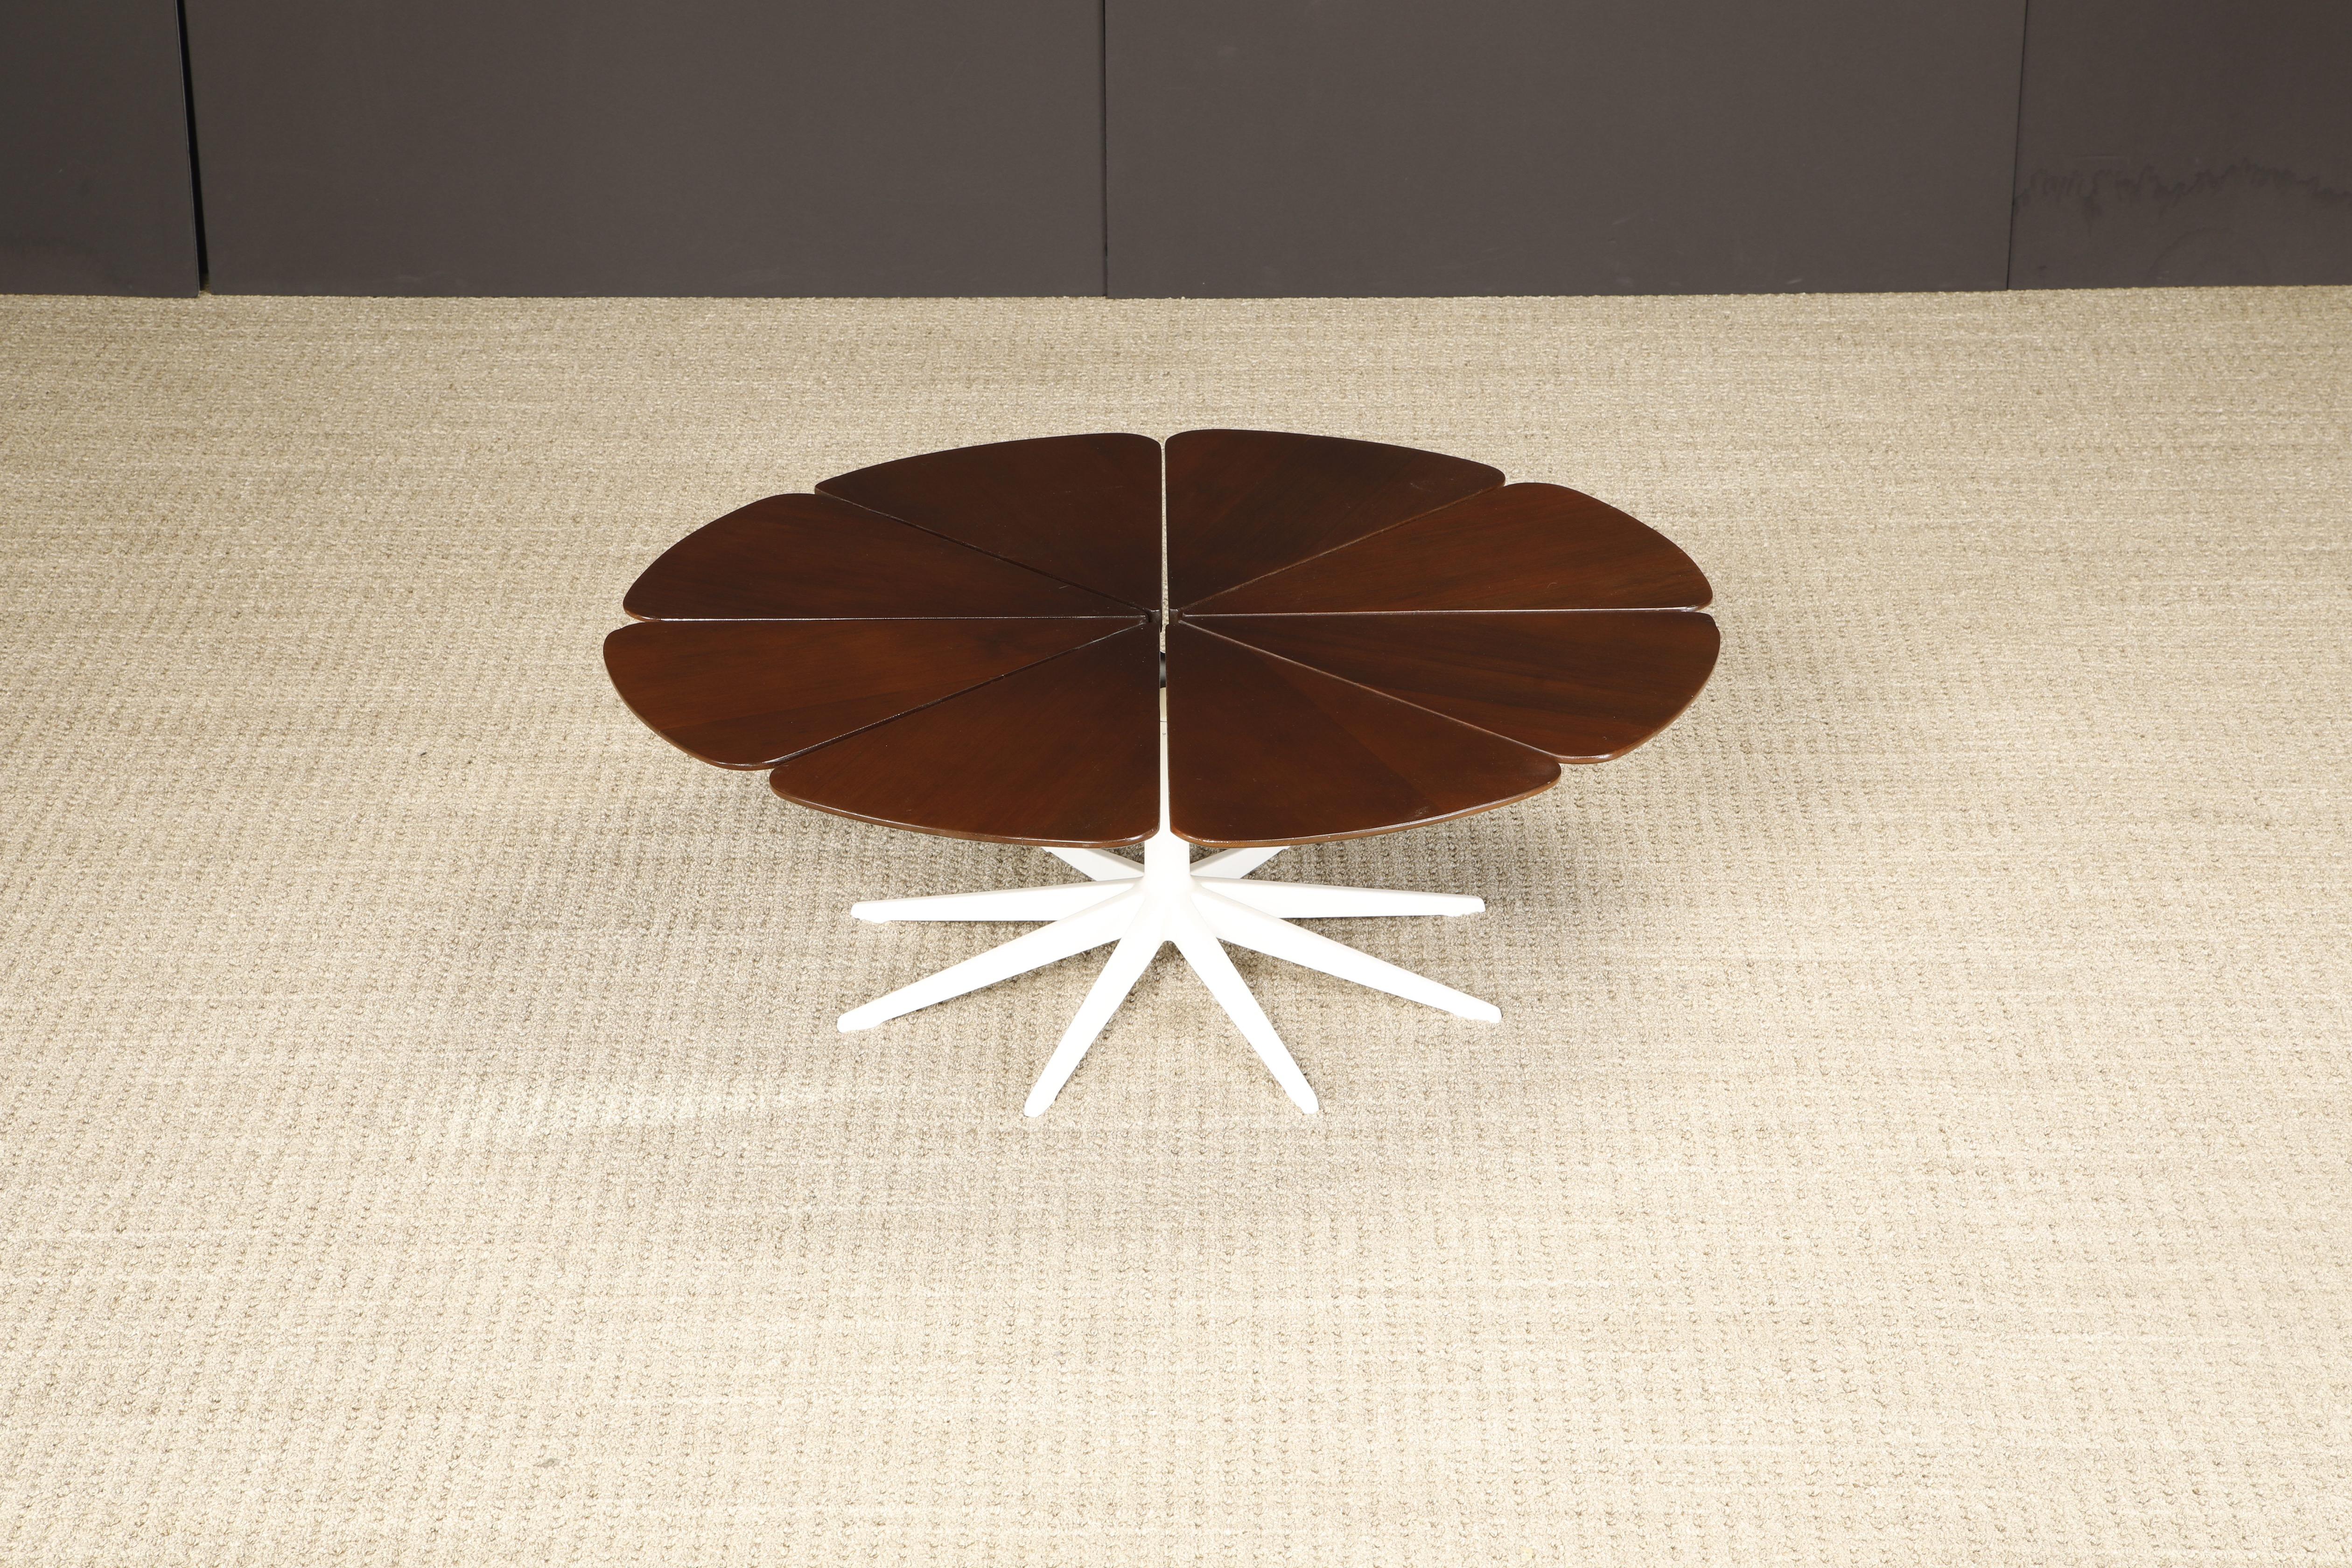 This 1st Generation original of the 'Petal' coffee table with Redwood 'petals' by Richard Schultz for Knoll Associates, designed in 1960, is a favorite amongst Mid-Century Modern collectors and enthusiasts. This example is signed with a Knoll